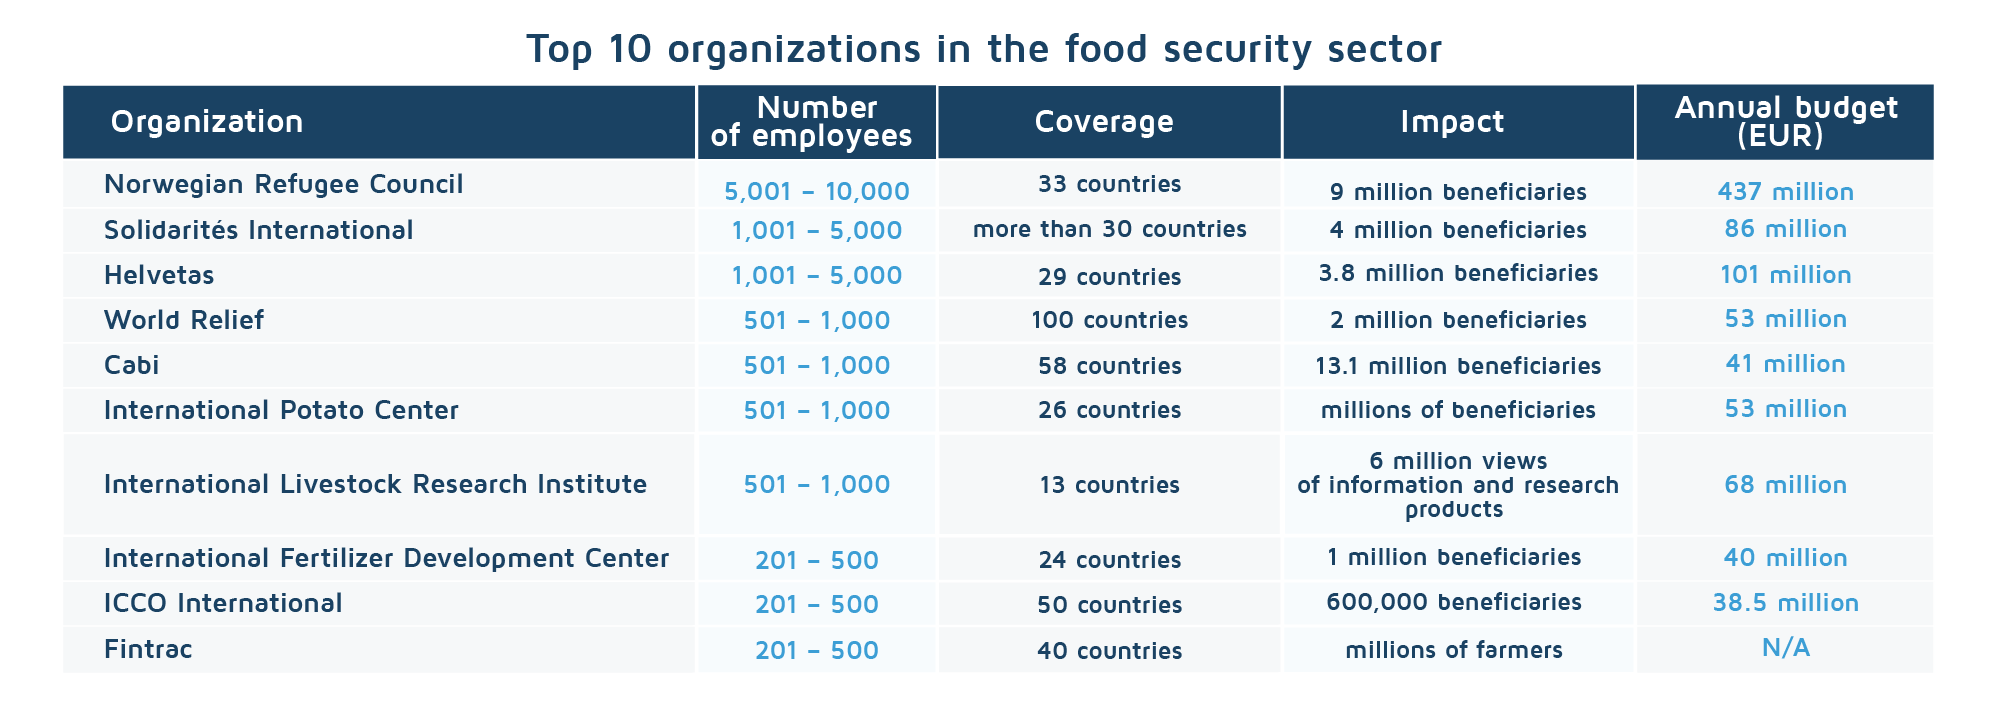 Top 10 organizations in food security sector_table